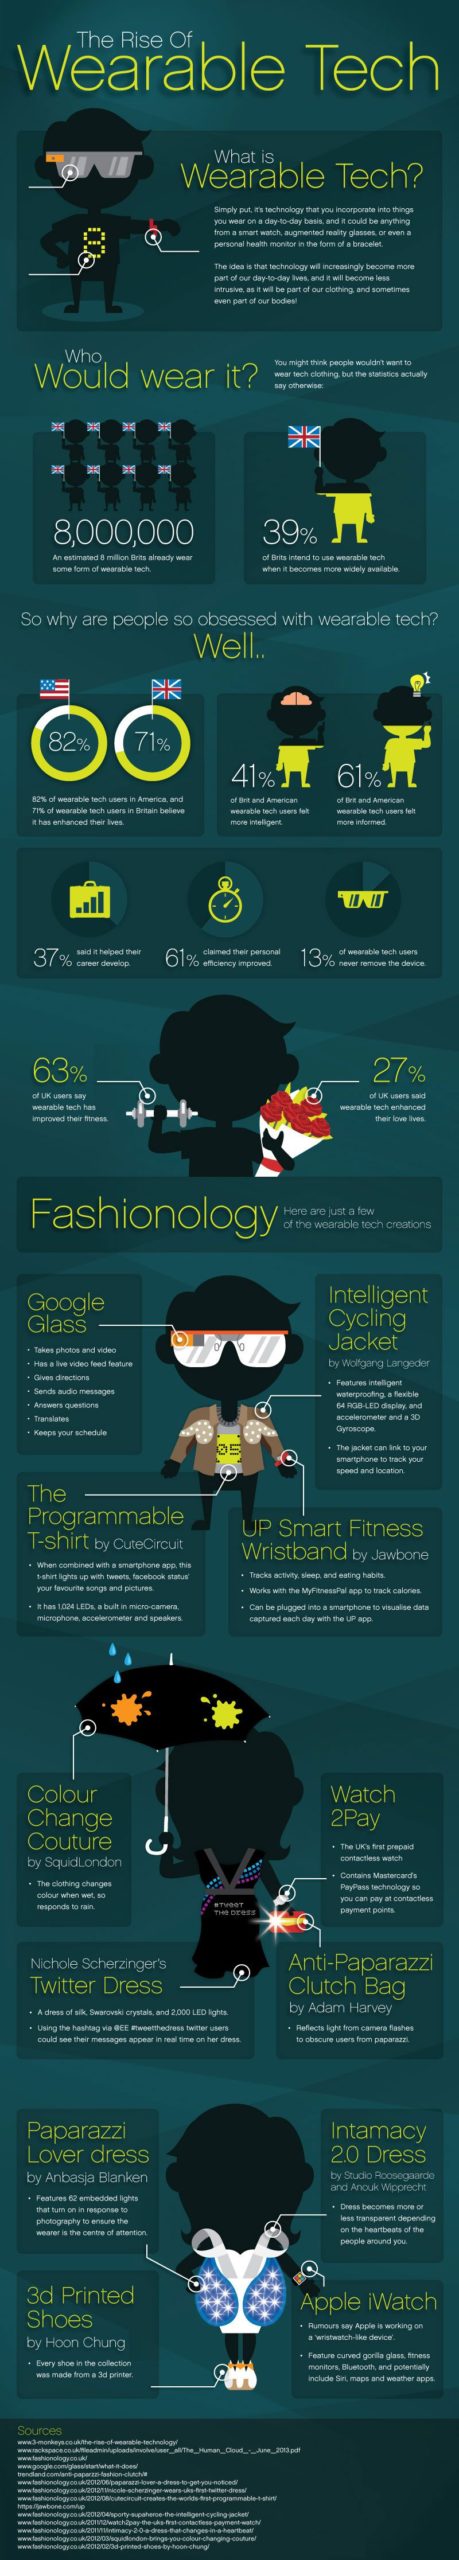 Wearable technology is on the rise - phideas